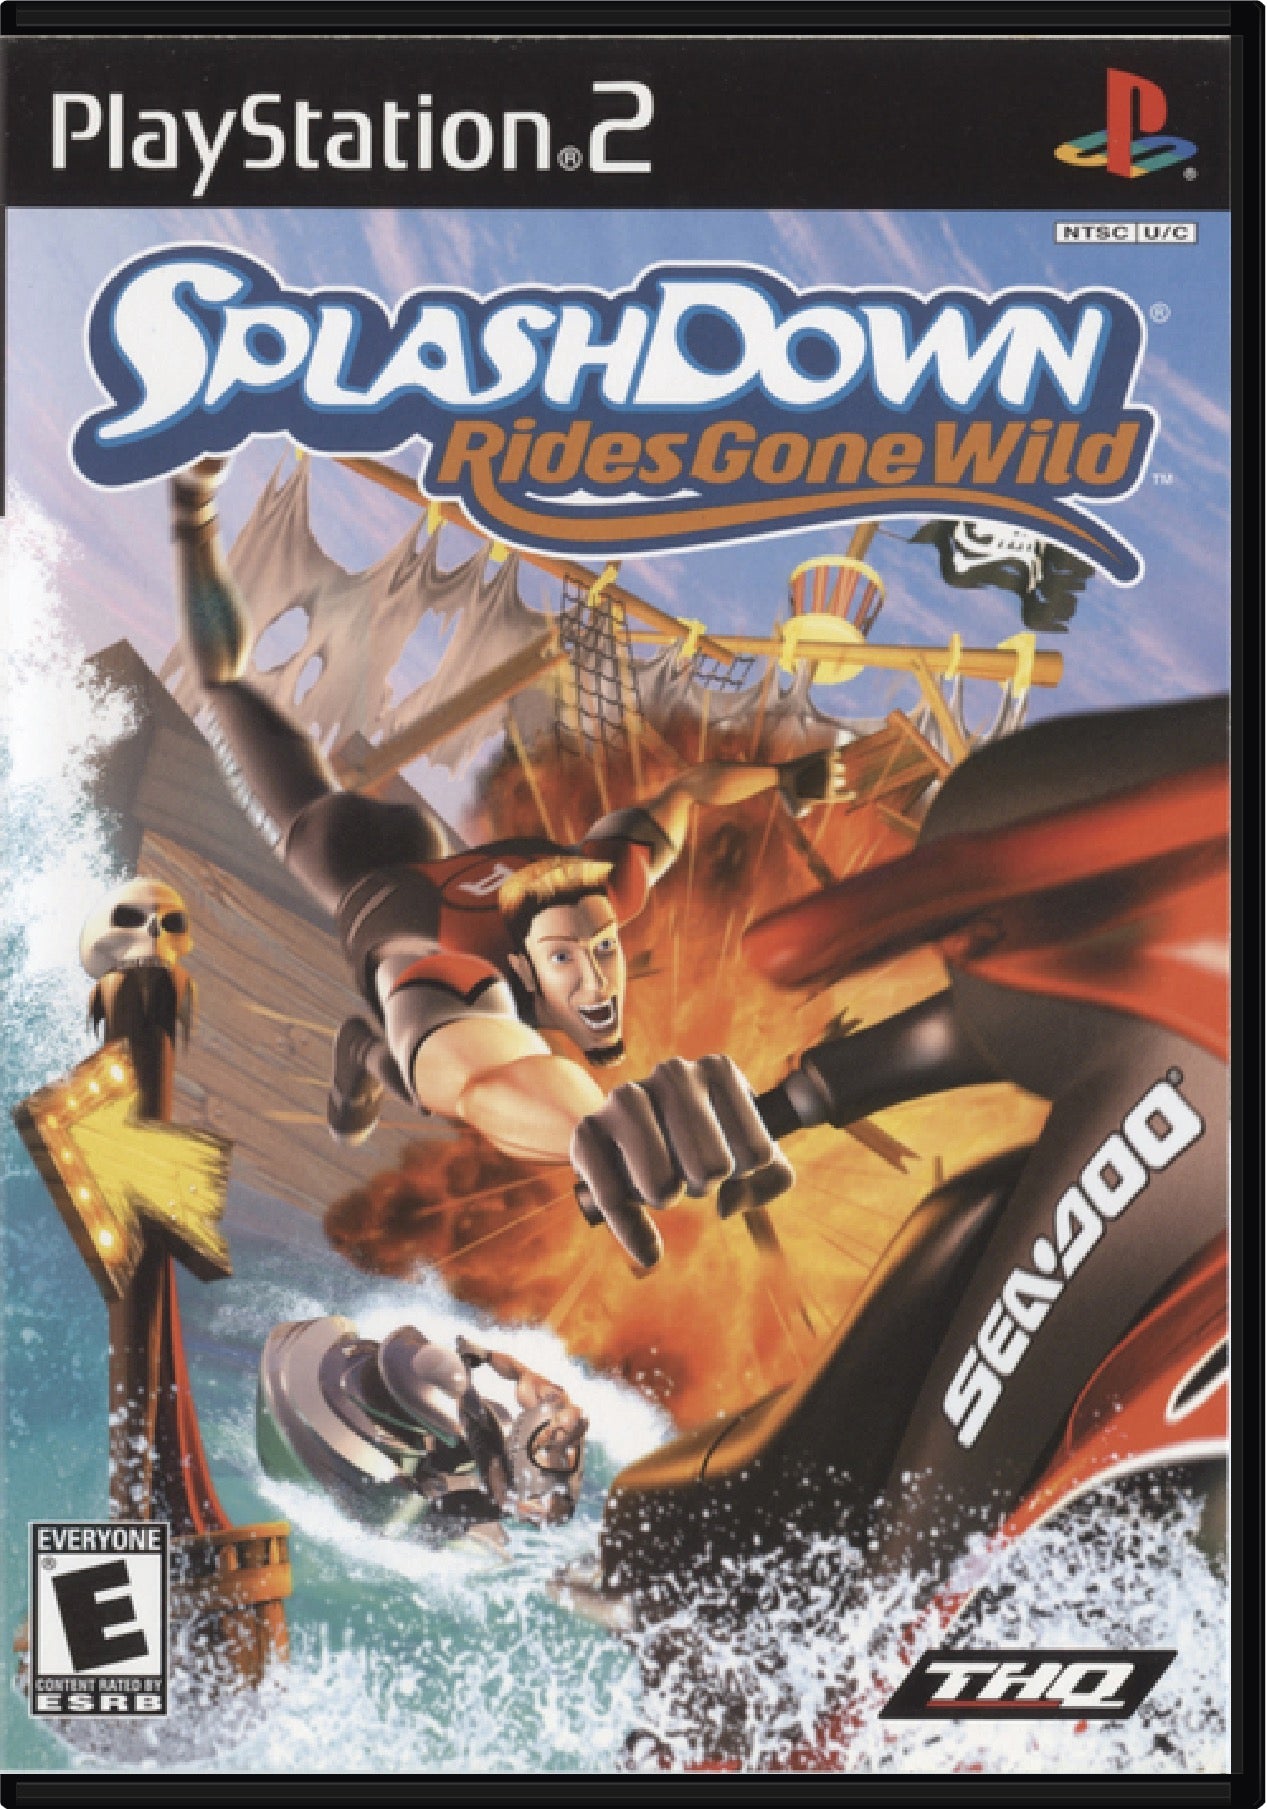 Splashdown Rides Gone Wild Cover Art and Product Photo